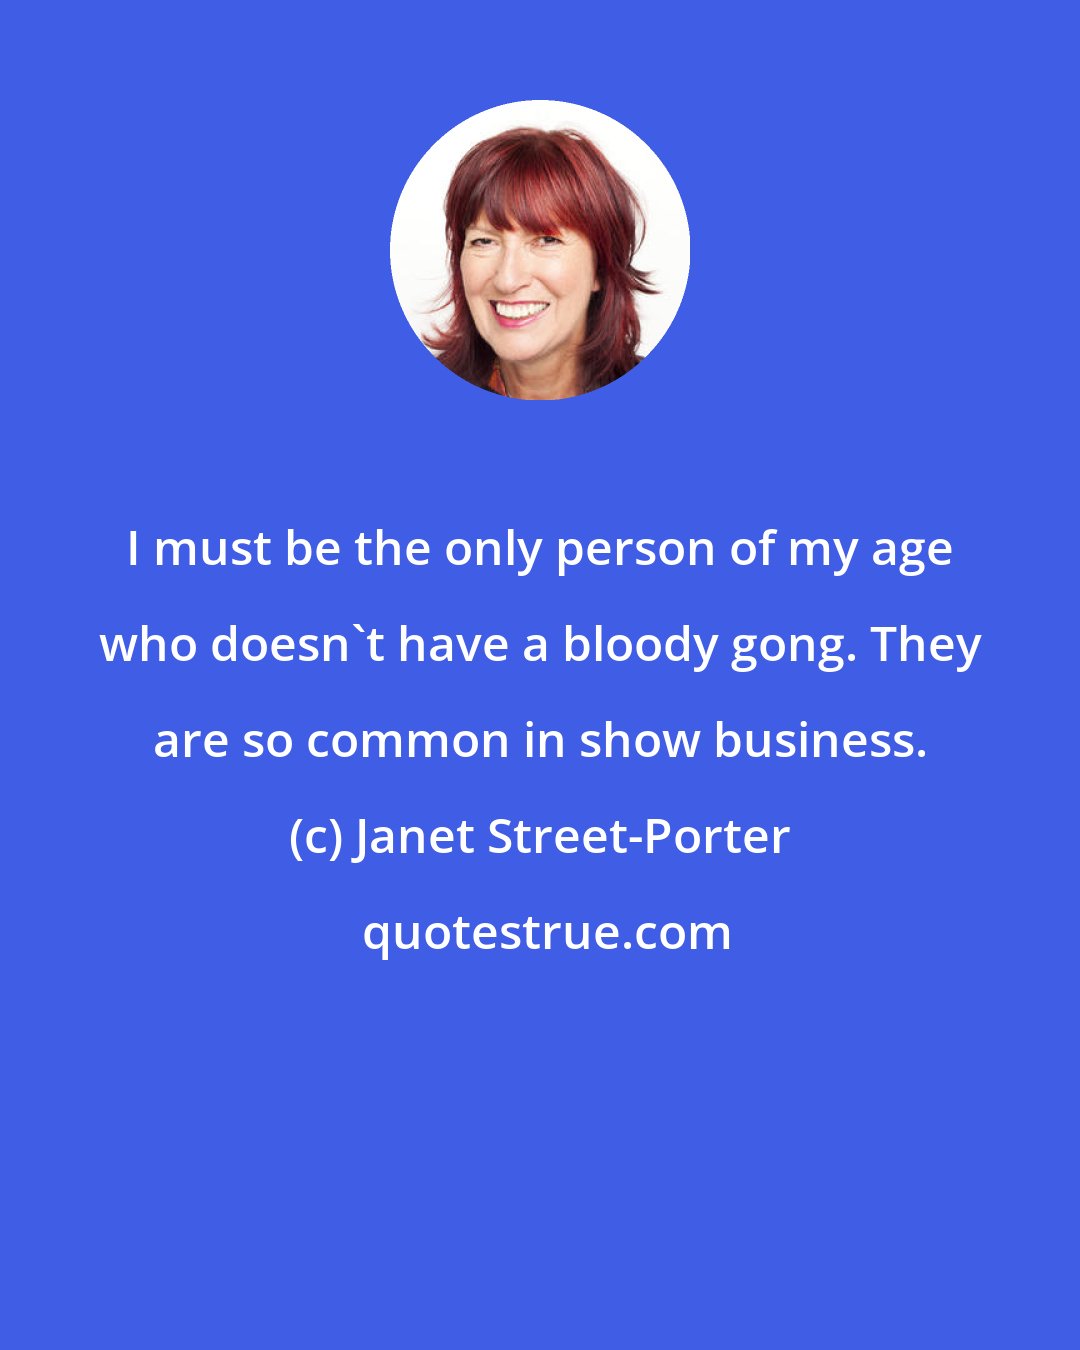 Janet Street-Porter: I must be the only person of my age who doesn't have a bloody gong. They are so common in show business.